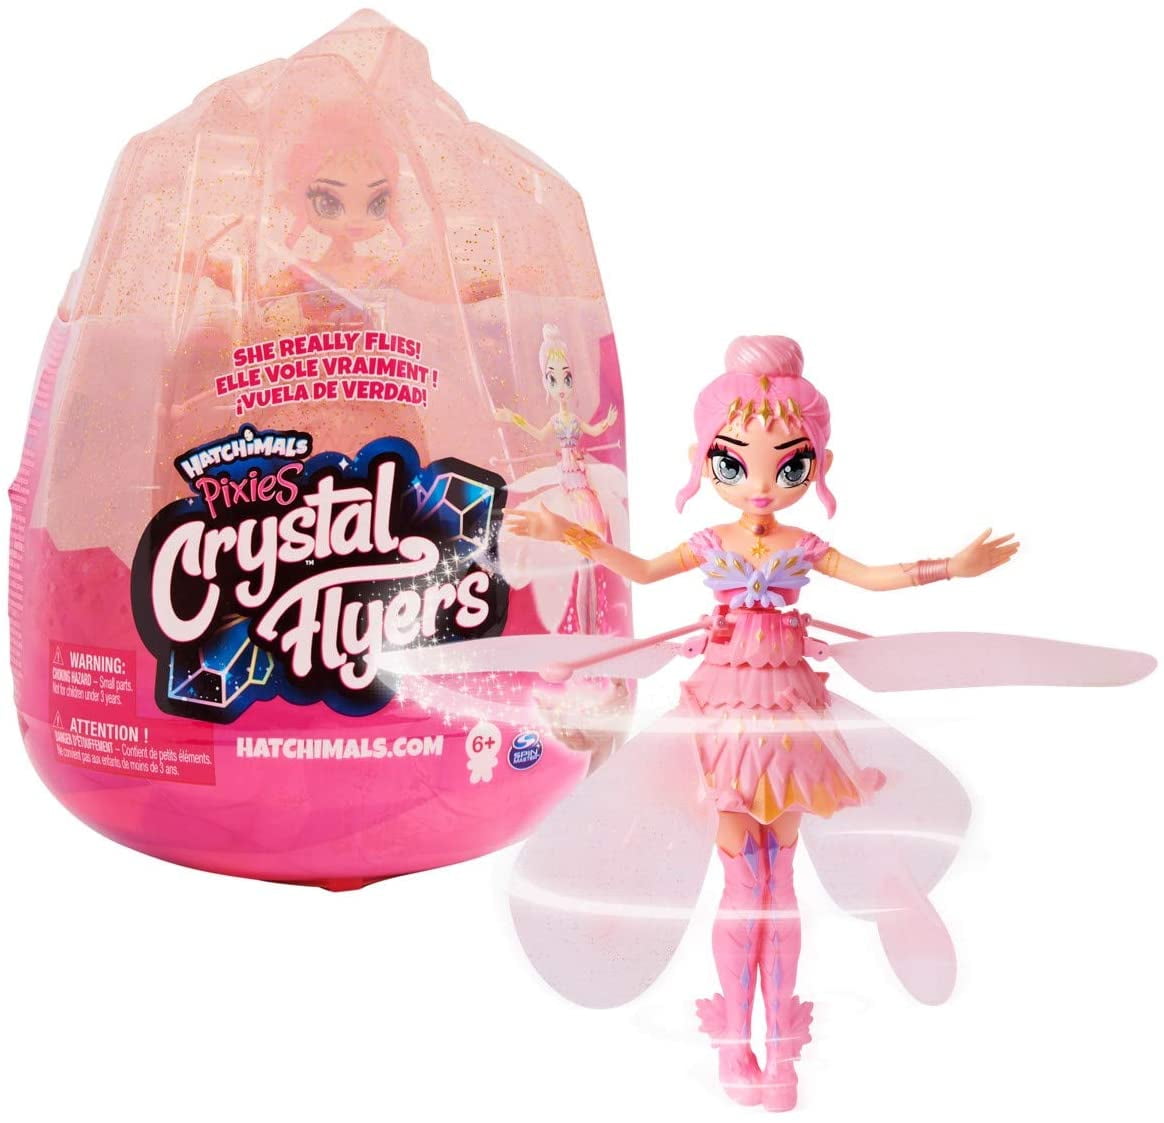 Crystal Flyers Pink Magical Flying Pixie Toy for Kids Aged 6 Details about   Hatchimals Pixies 